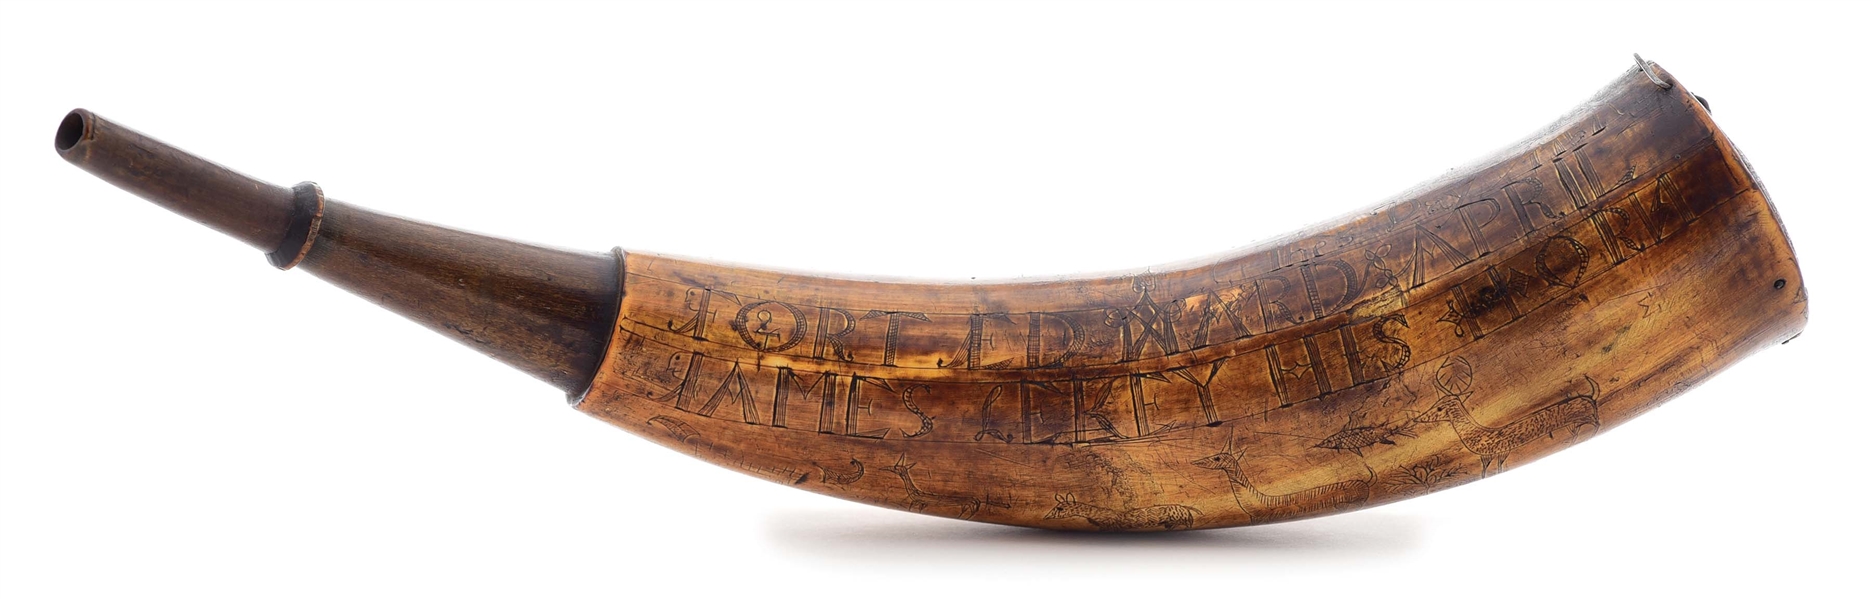 ENGRAVED FORT EDWARD POWDER HORN SIGNED BY ROGERS RANGERS SGT. WILLIAM AKIN, MADE FOR JAMES LEKEY, DATED 1757.